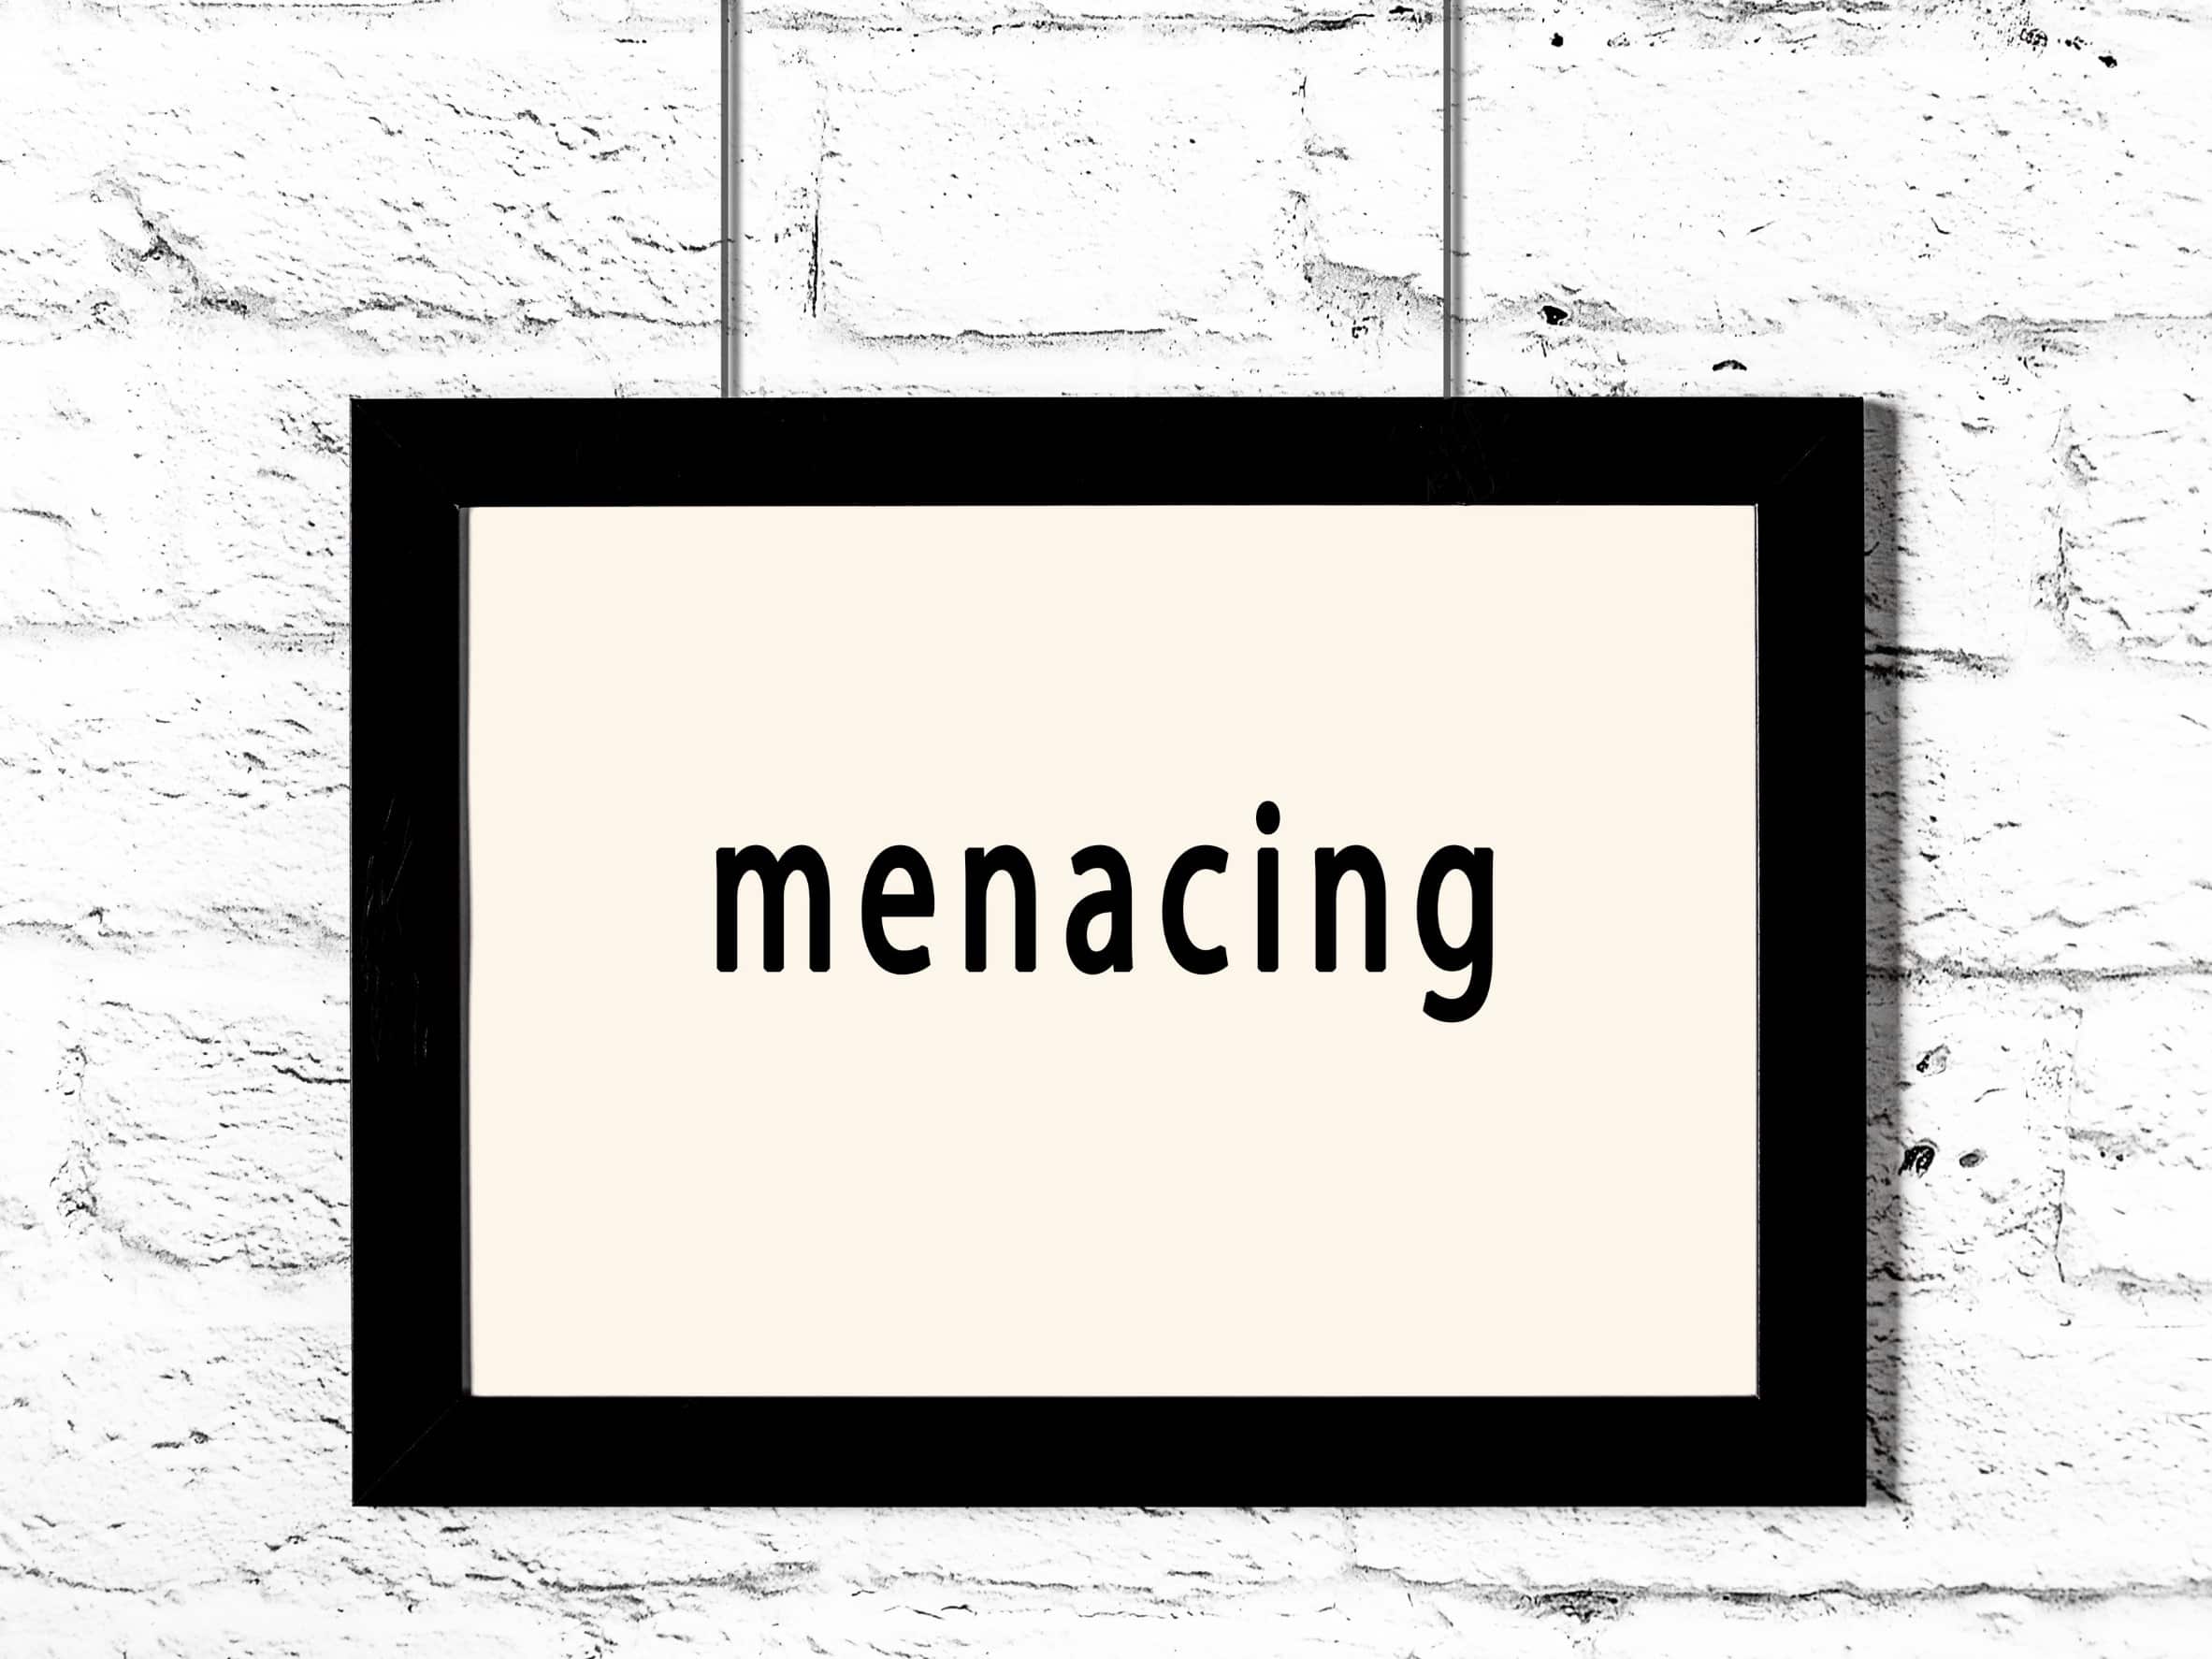 What is the meaning of the word MENACINGLY? 